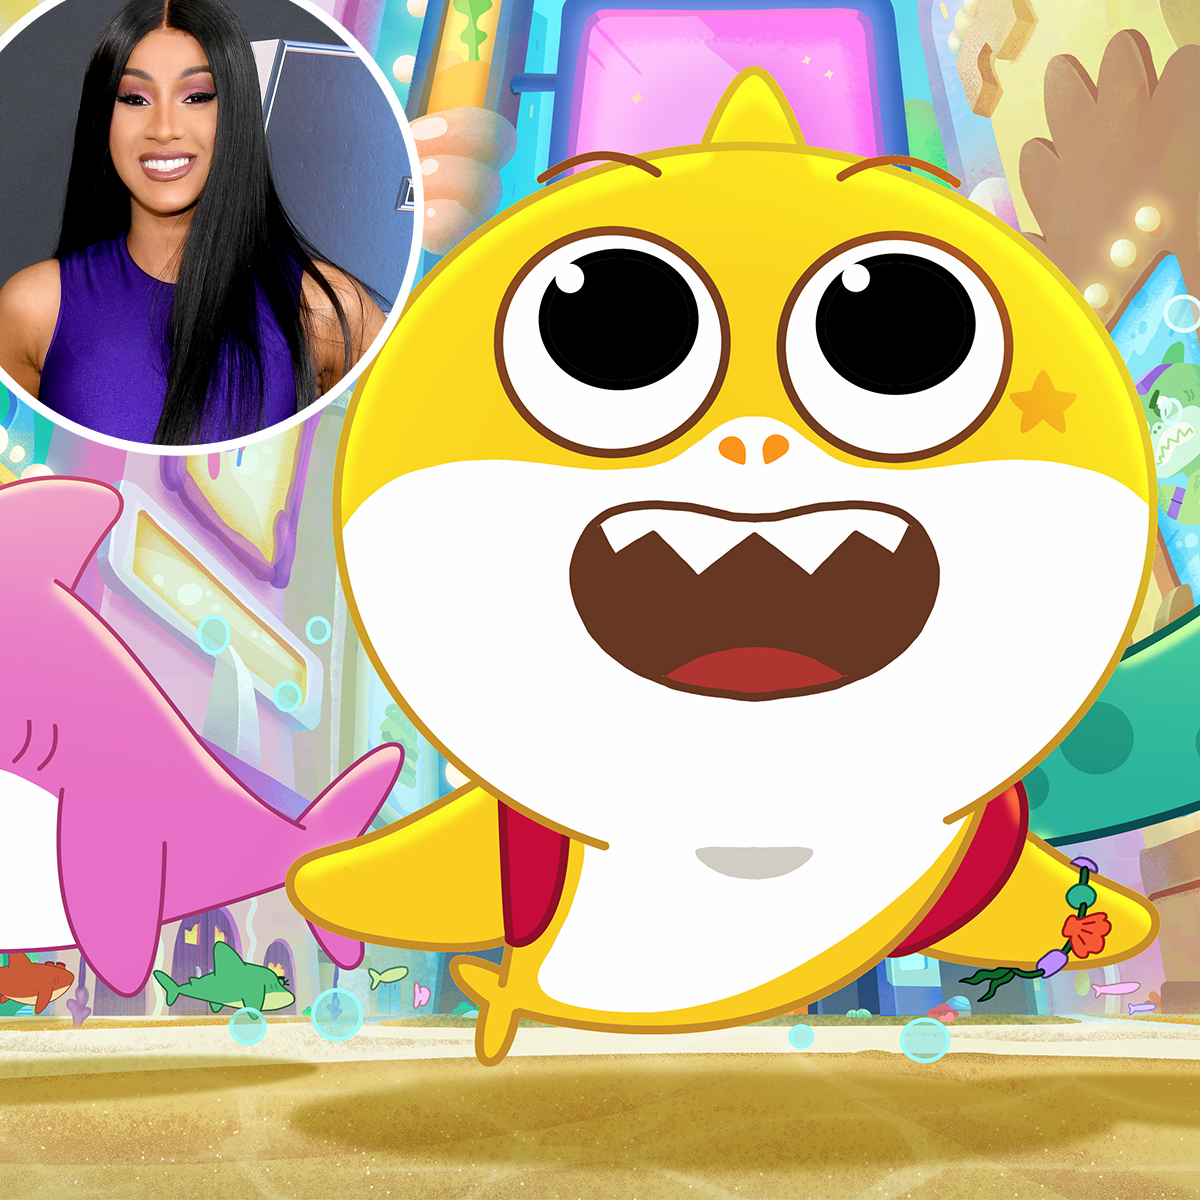 CARDI B AND FAMILY SLATED TO STAR IN 'BABY SHARK'S BIG MOVIE